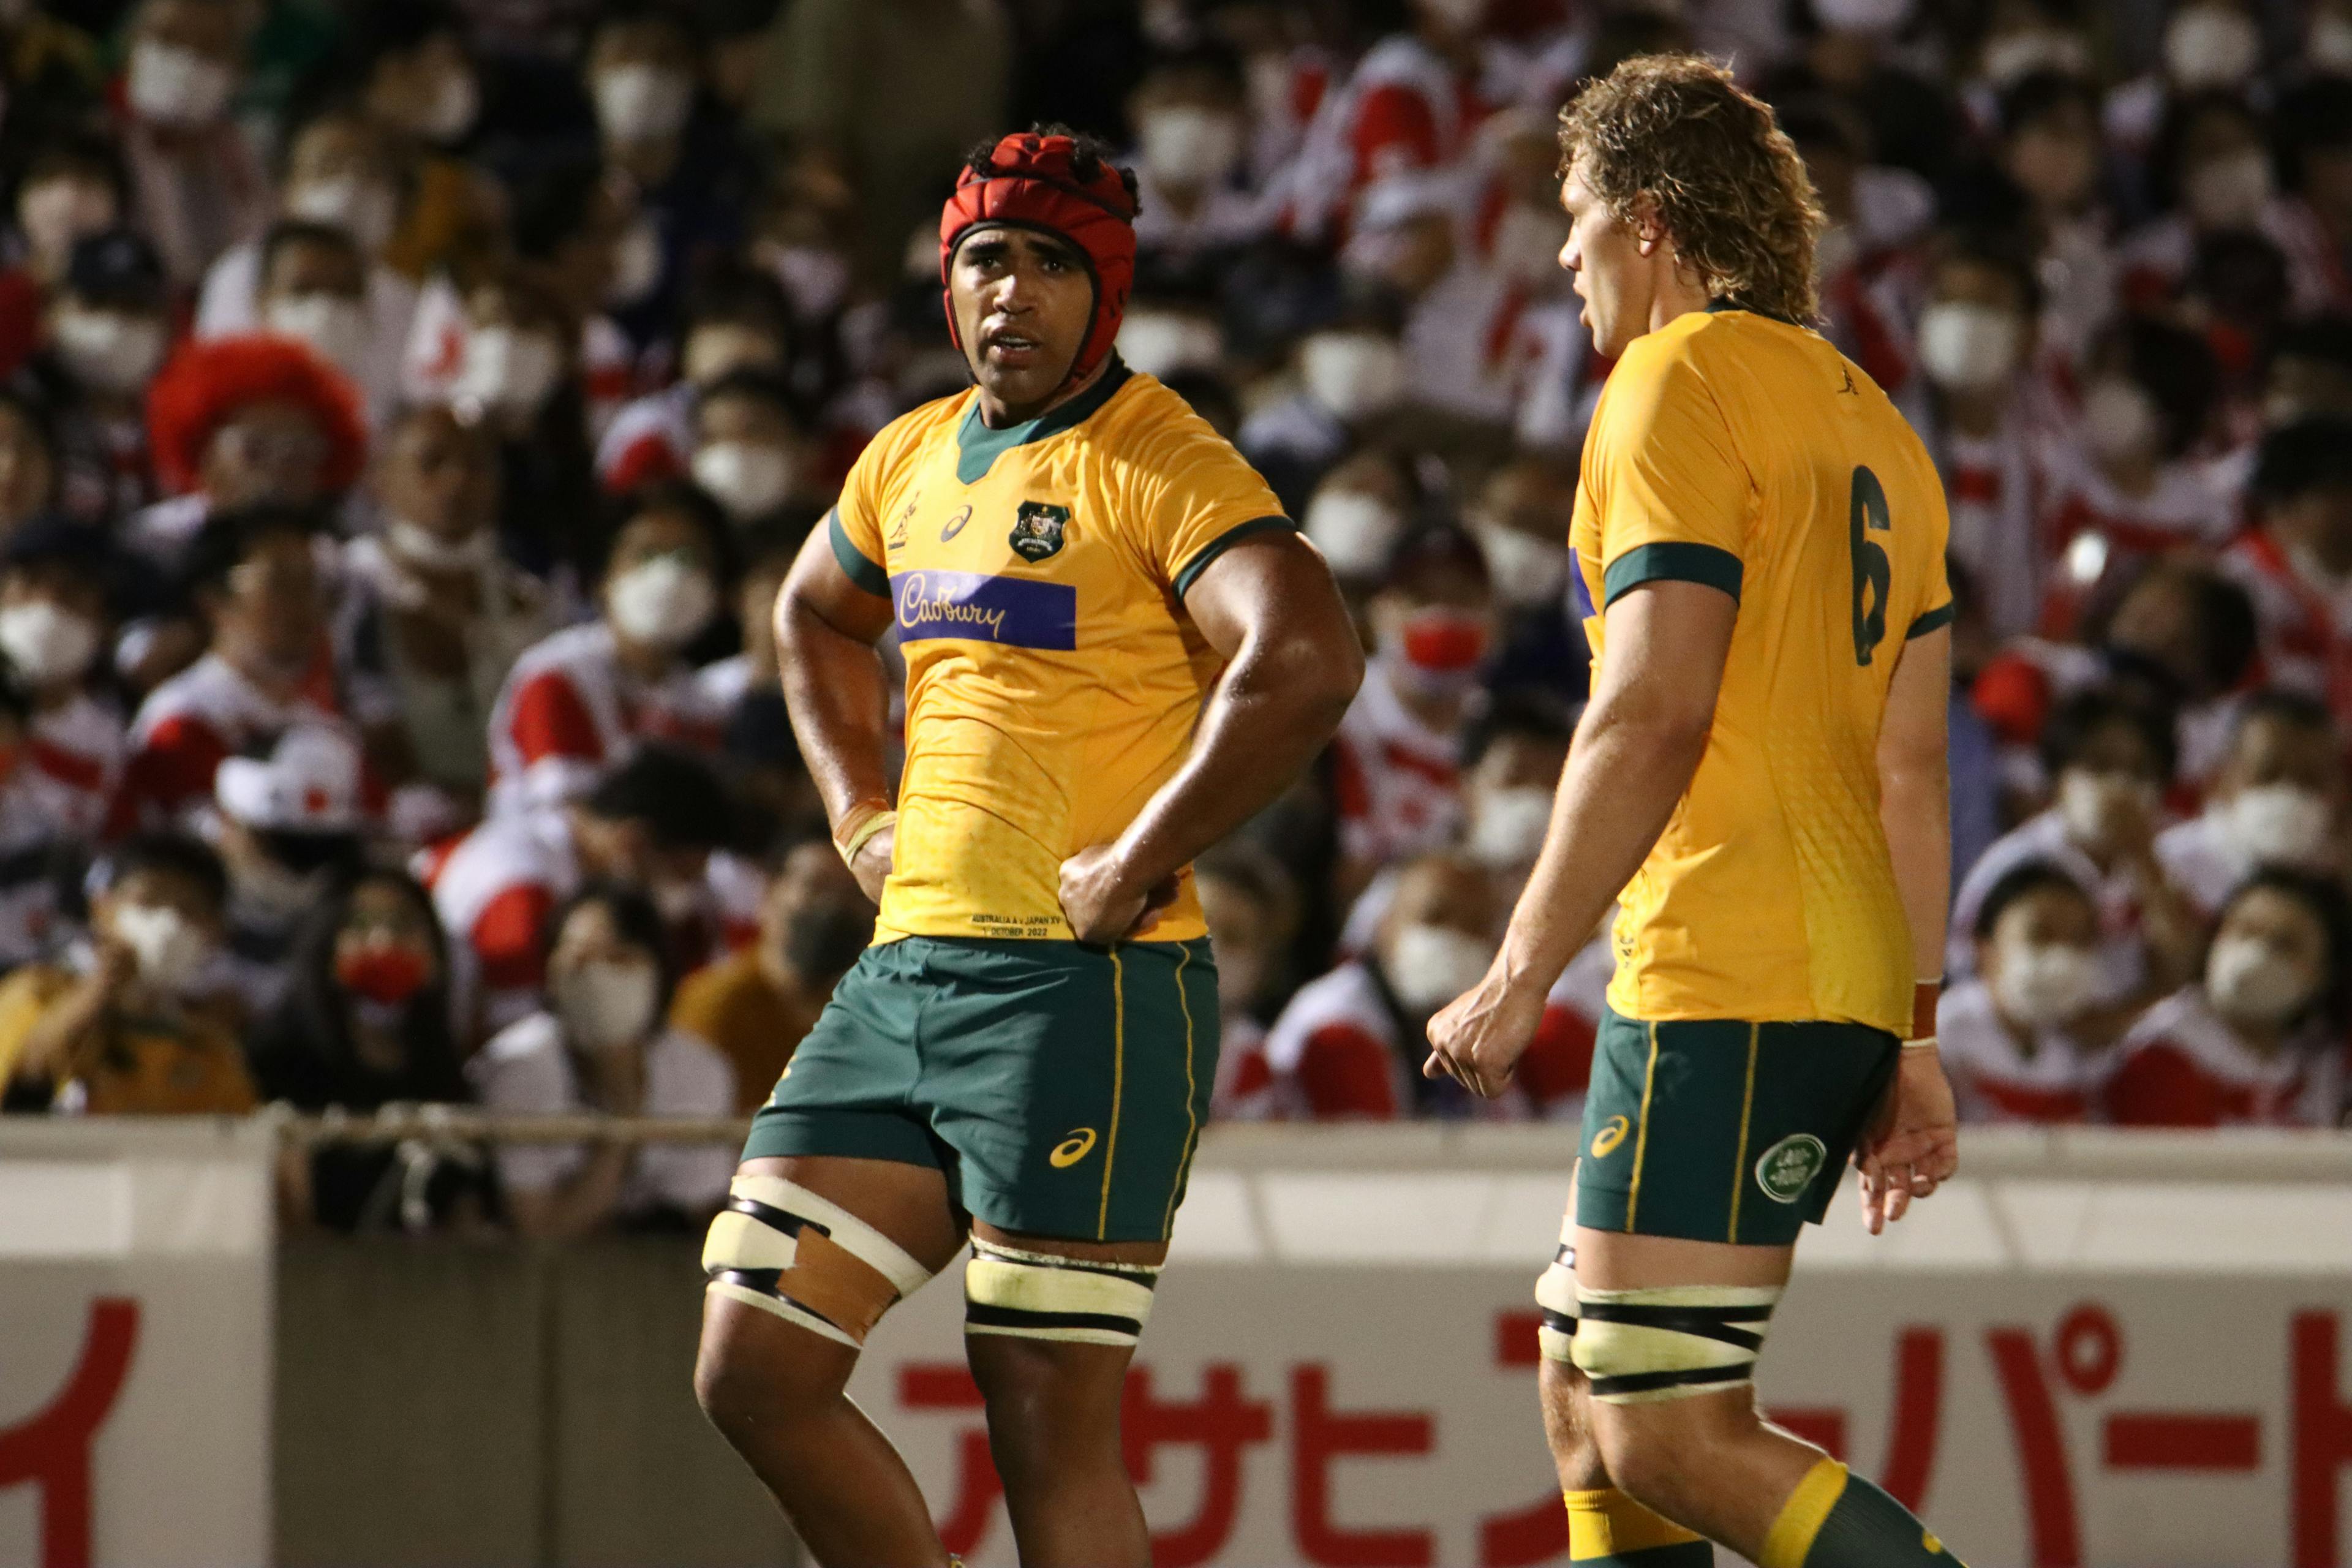 Rugby Australia and Tonga Rugby Union have confirmed that an Australia A team will travel to Tonga to play the Tonga national team on July 14.